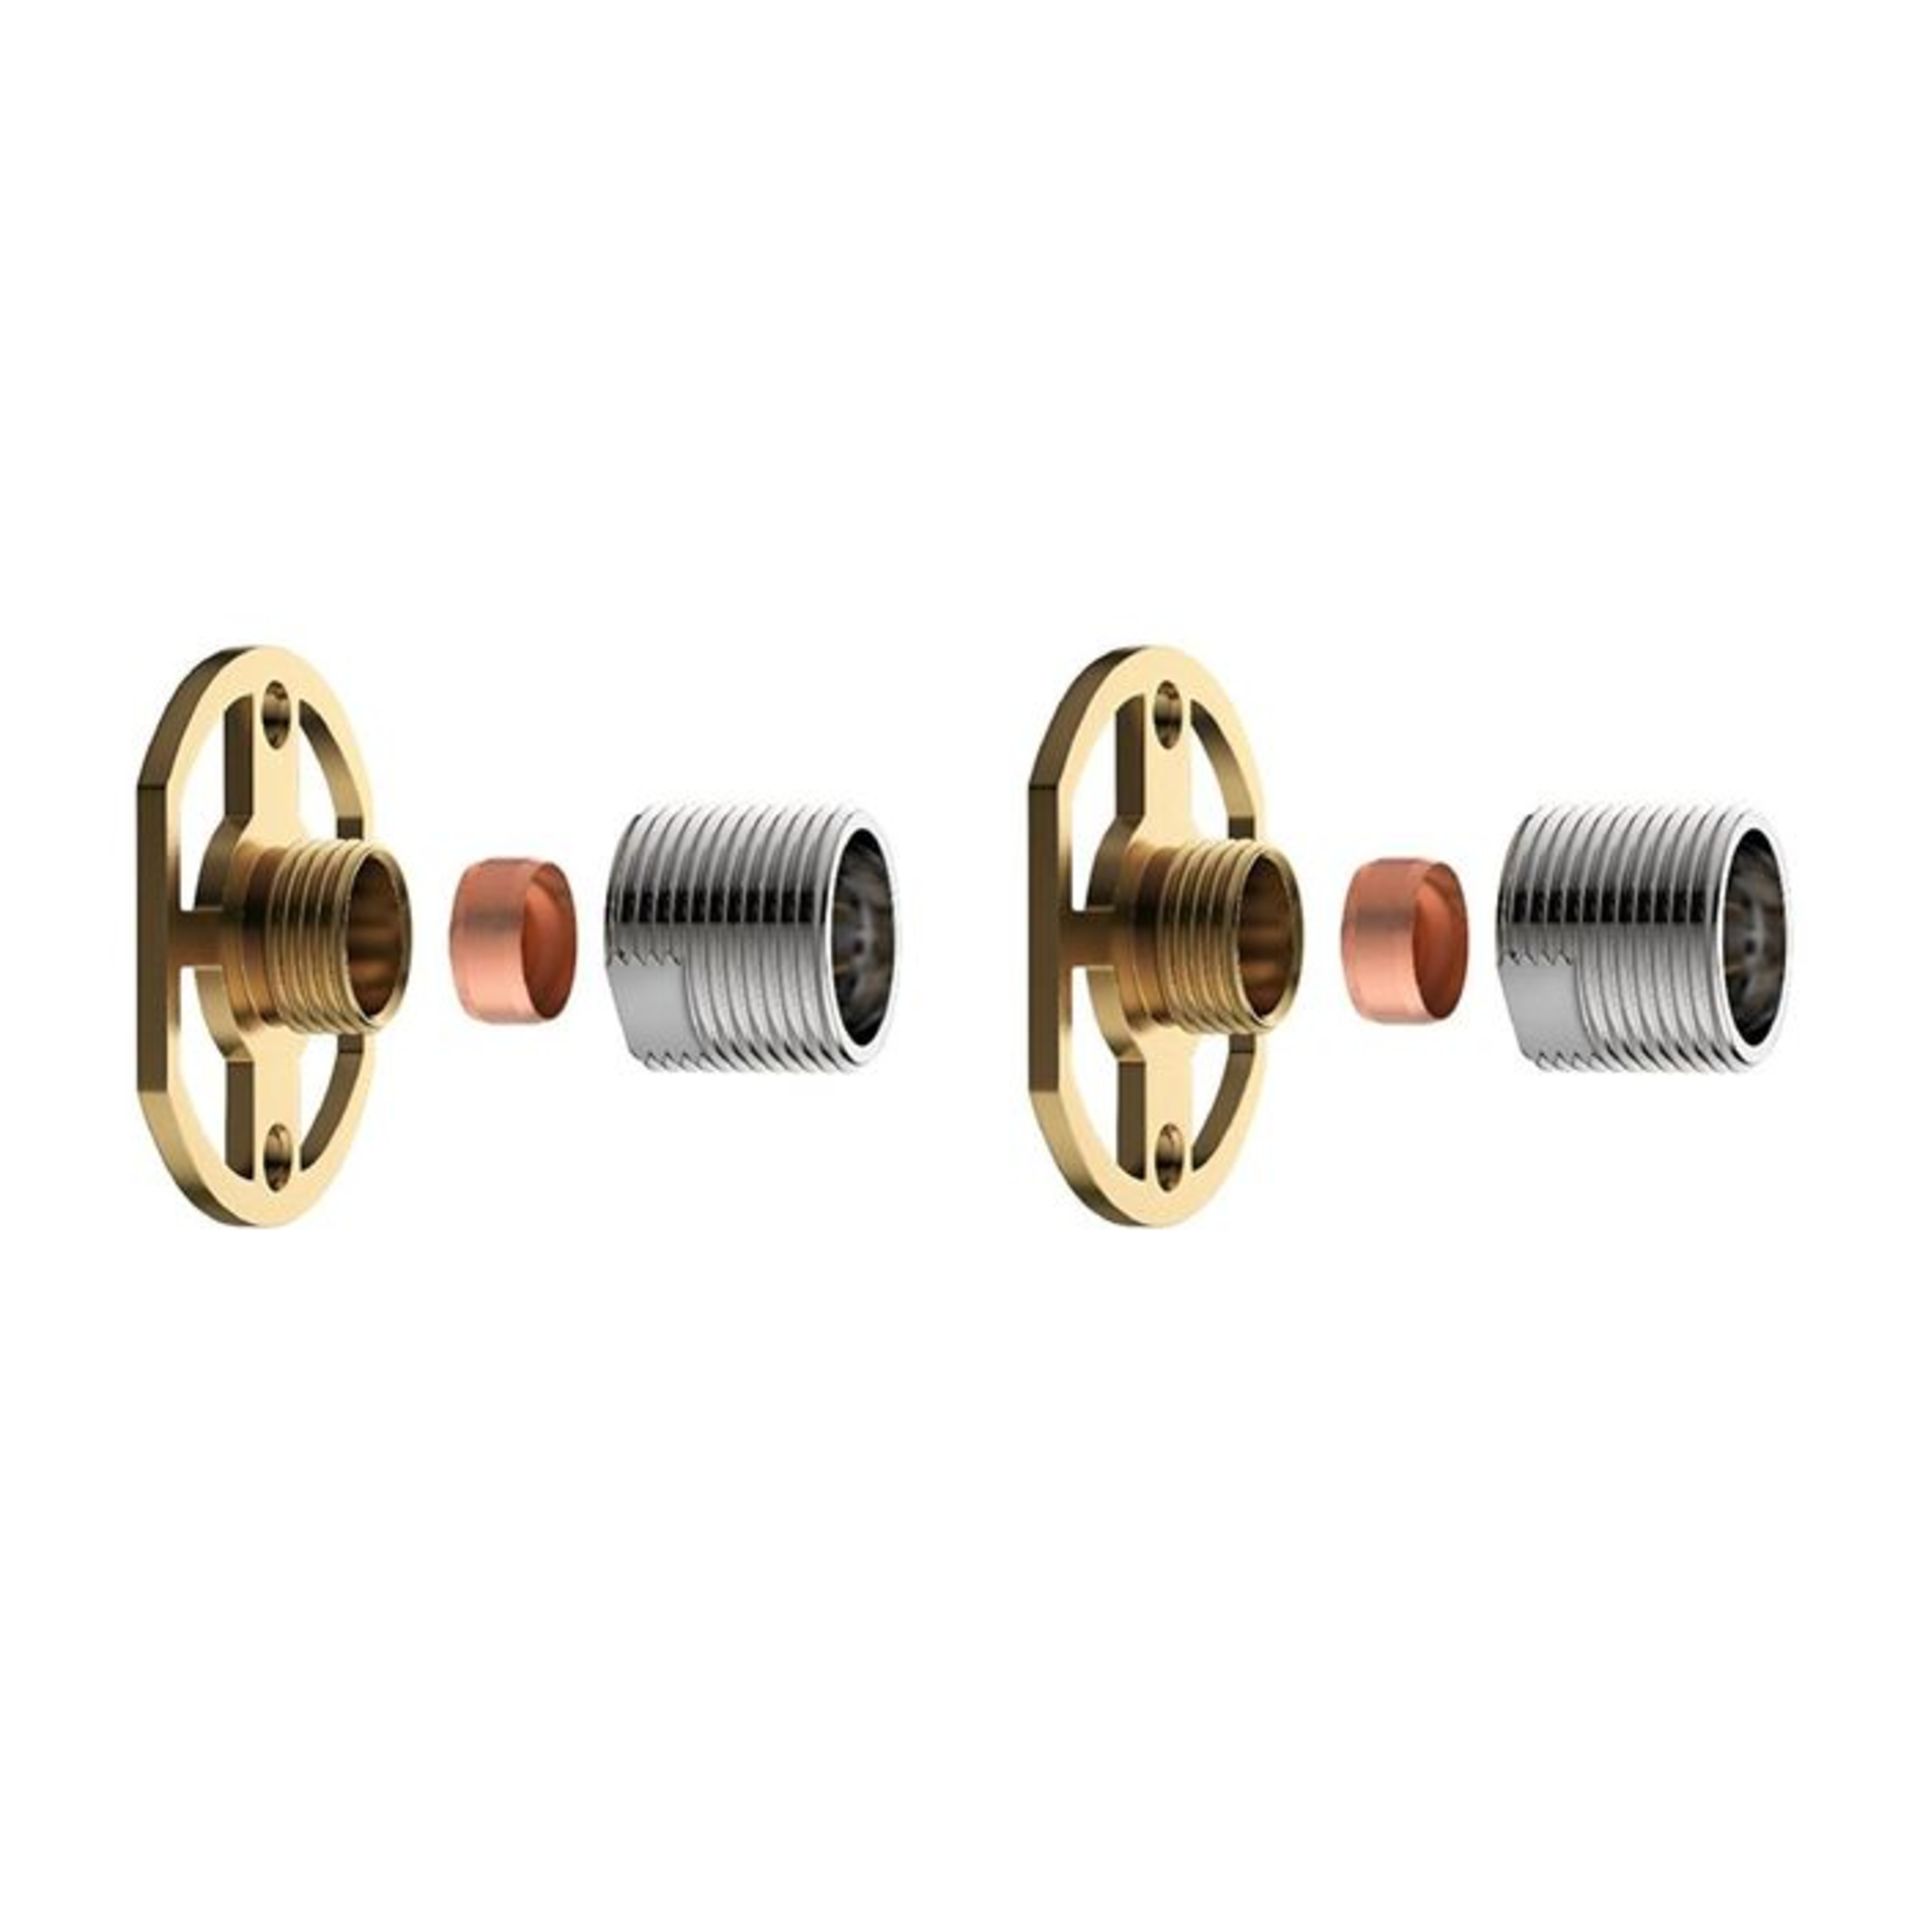 (QT1004) Quick Fix Kit for Exposed Shower Mixer Valve. Made from solid brass G3/4" connector i... - Image 2 of 2